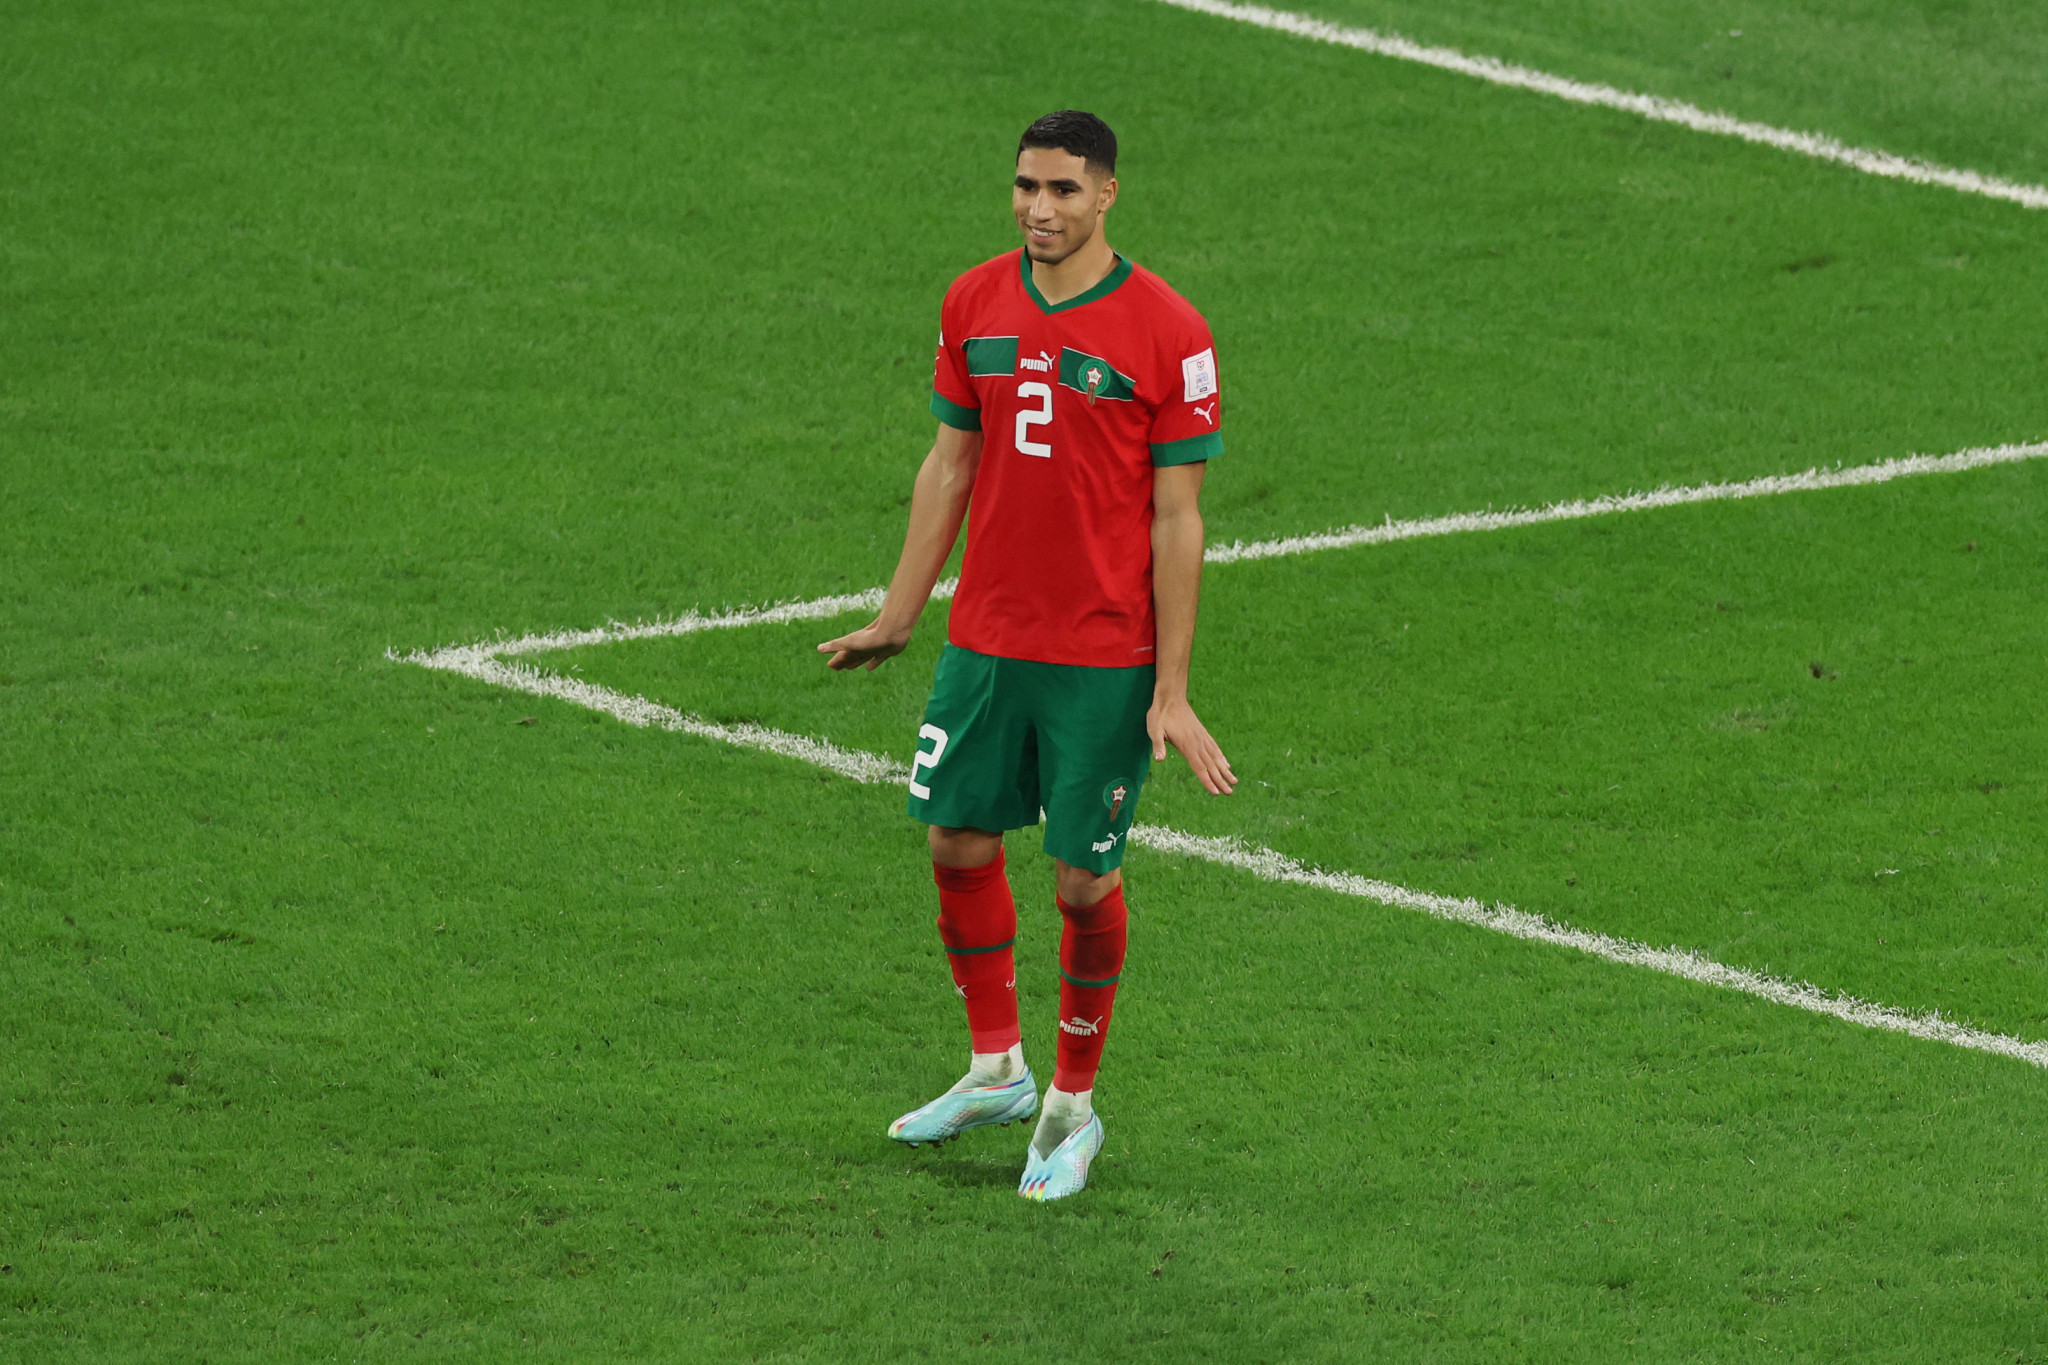 Madrid-born Achraf Hakimi clipped home the decisive spot kick as Morocco won on penalties ©Getty Images